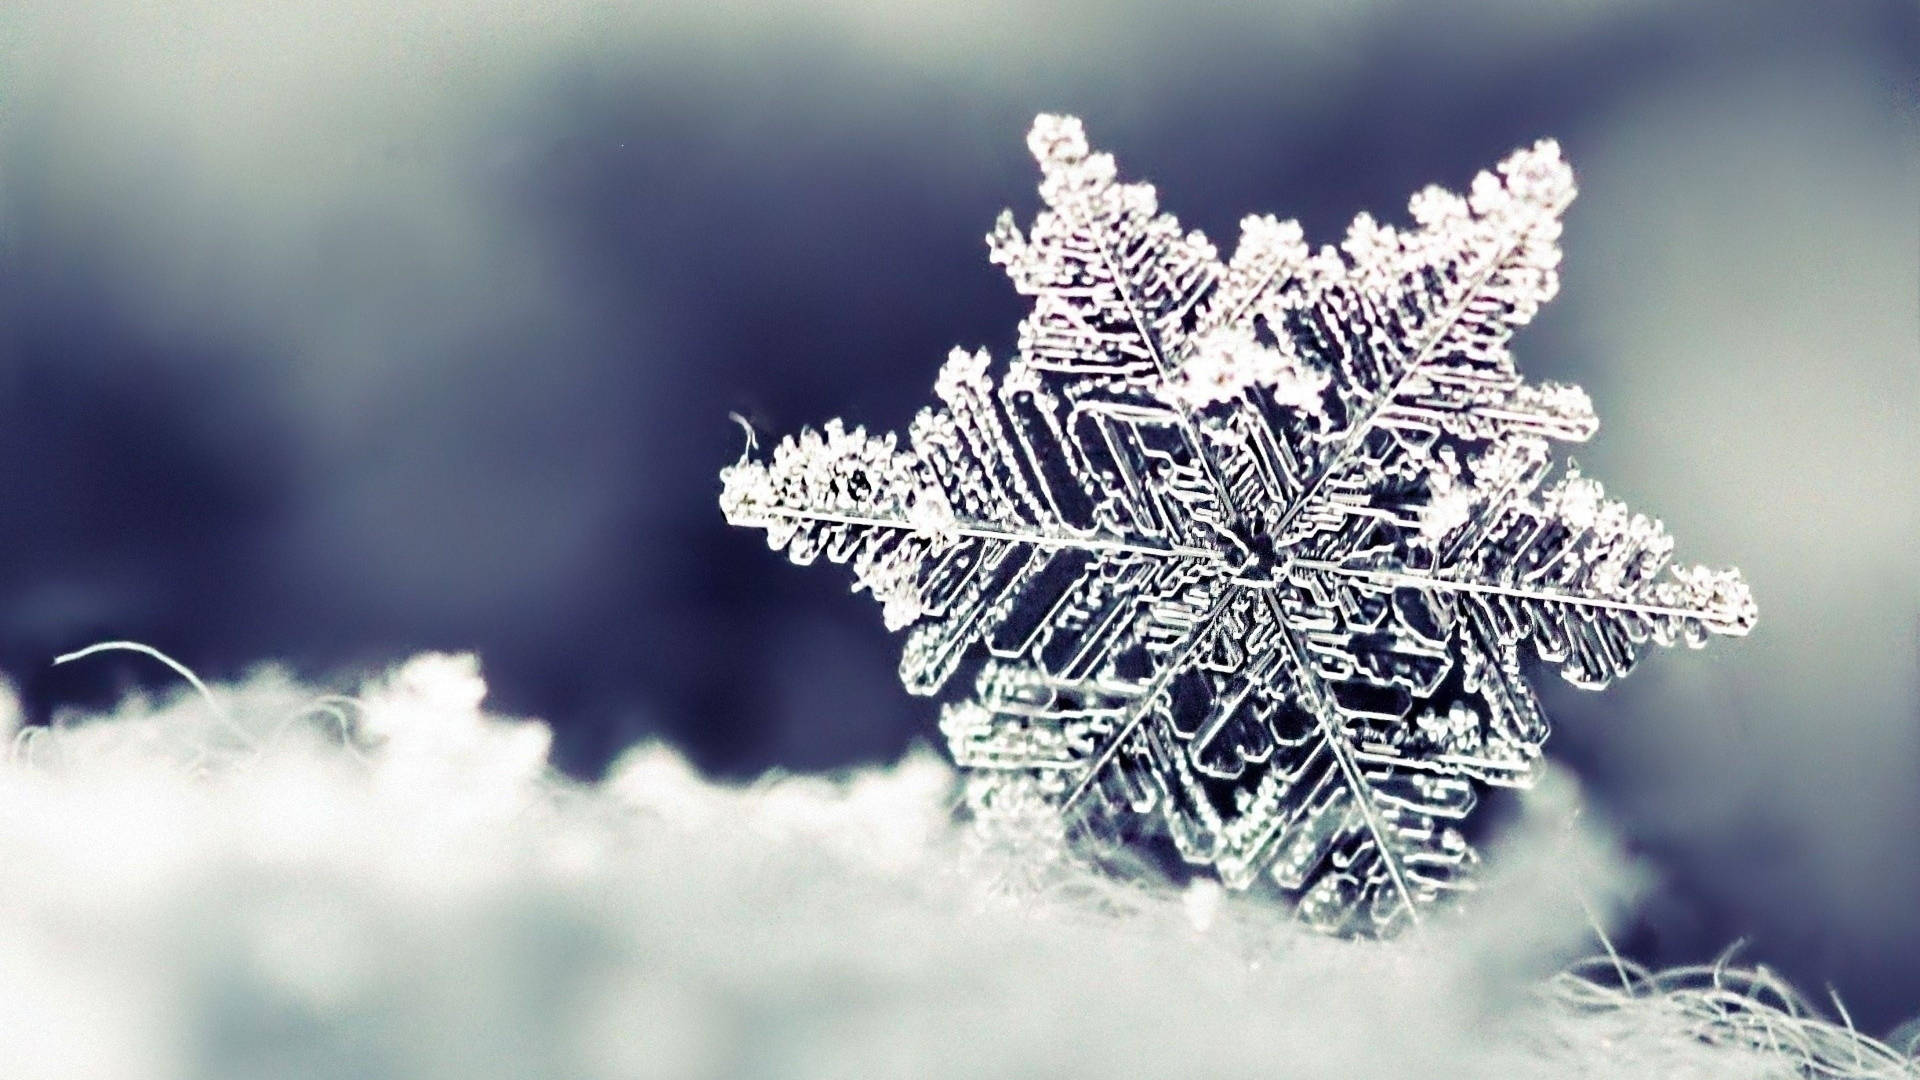 Snowflake 3840X2160 Wallpaper and Background Image